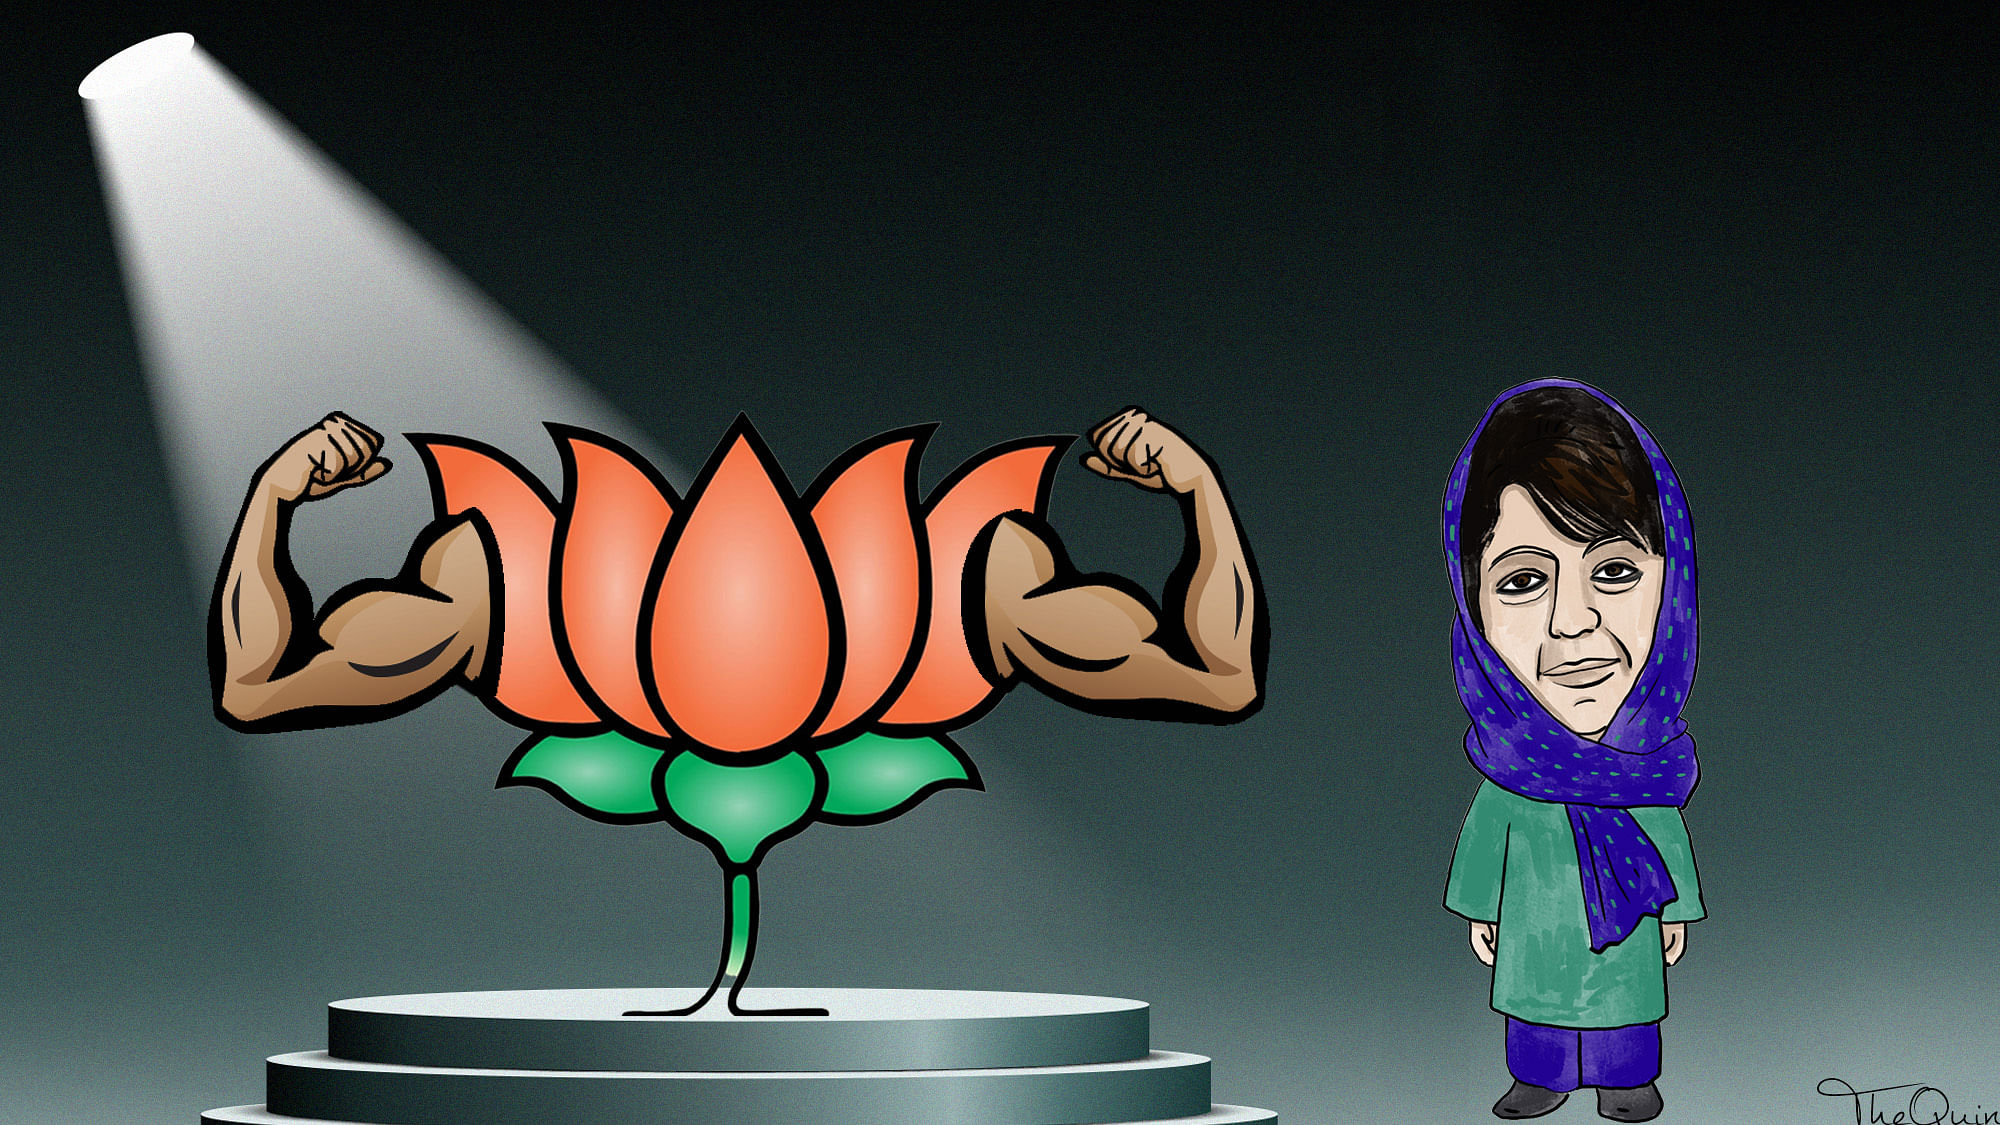 The BJP pulled out of the PDP alliance in Jammu and Kashmir on 19 June, Mehbooba Muti to quit from her CM post.